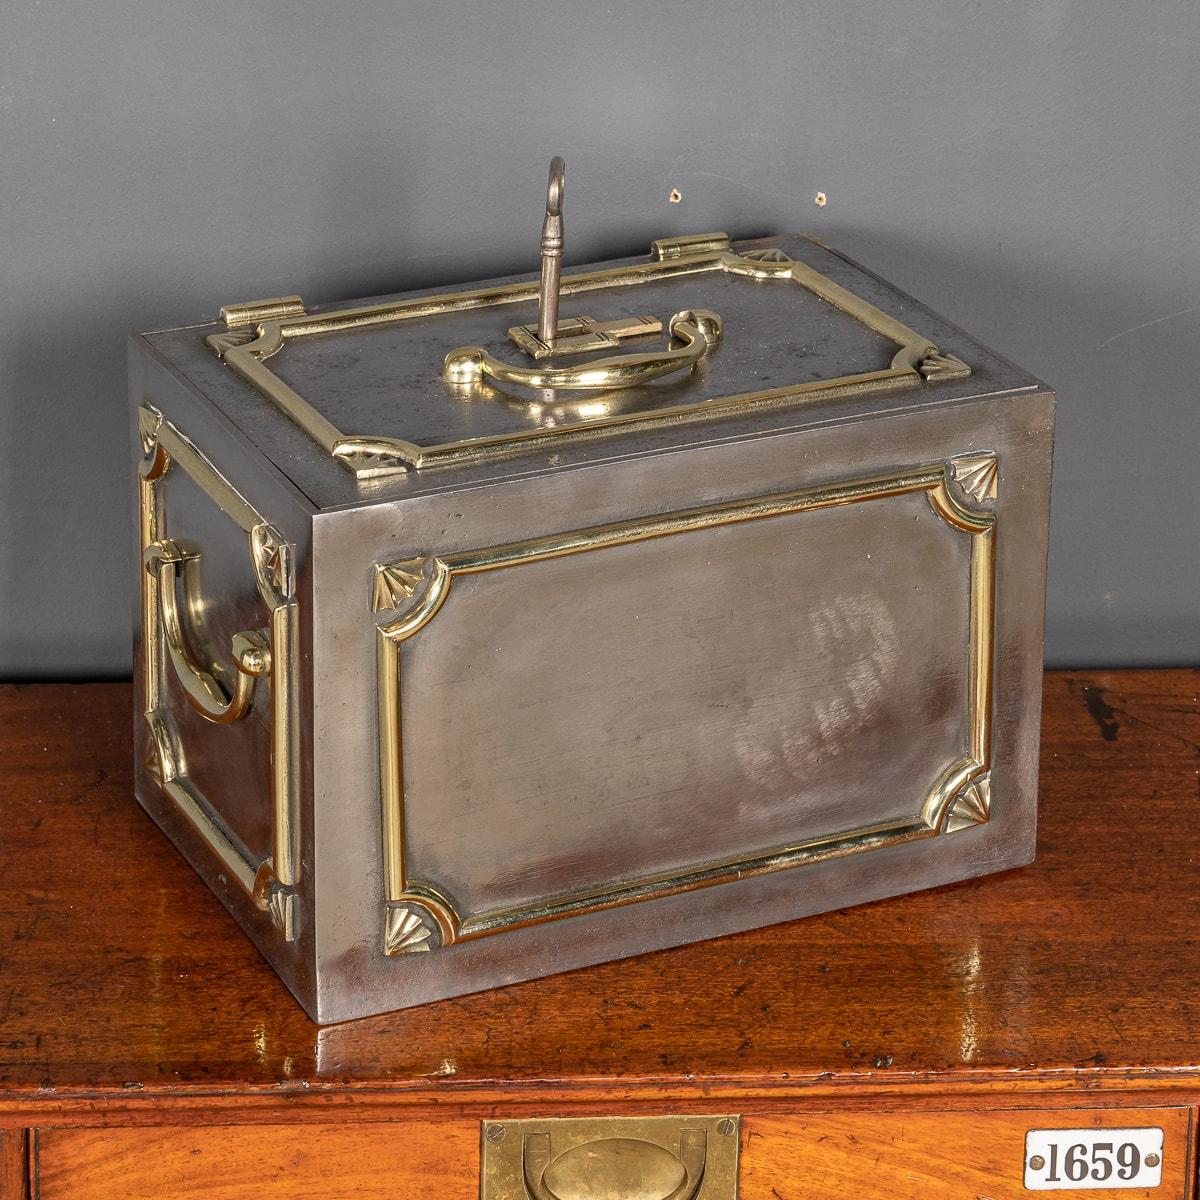 Antique 19th Century Victorian cast iron strongbox safe. Primarily used for the transport of document or valuables this was one of the first fireproof safes available. This piece has its original key. It would have been taken on long travels,